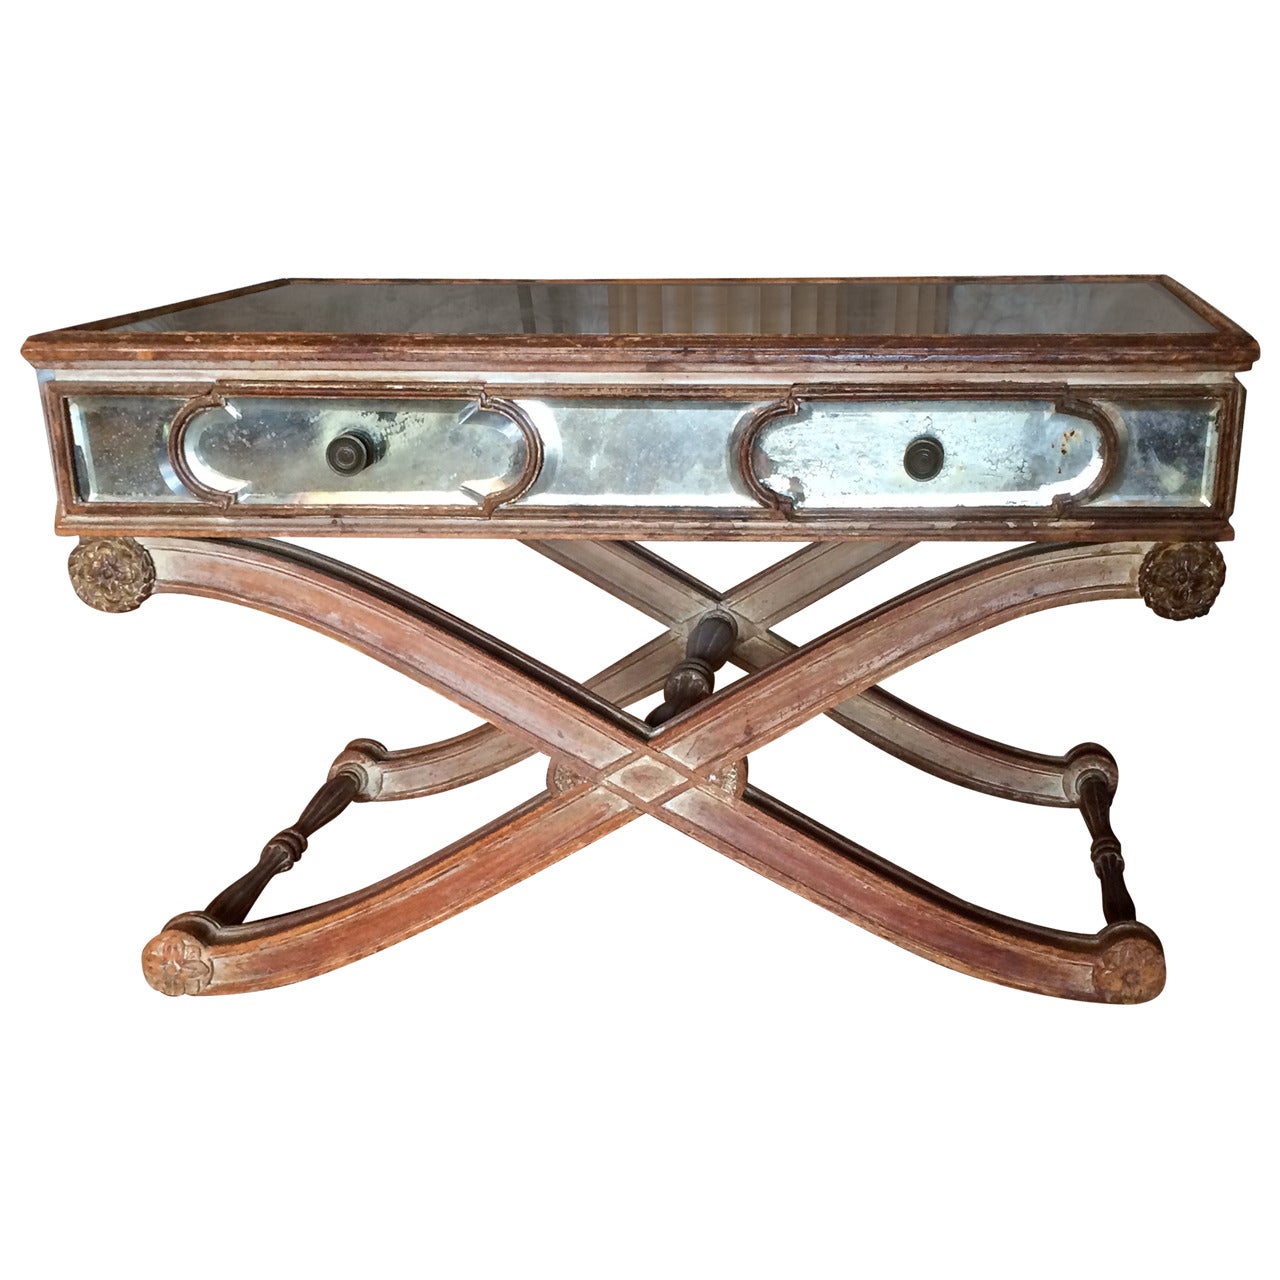 Italian Mid-20th Century Cerused Wood Mirrored Coffee Table with X-form Base For Sale